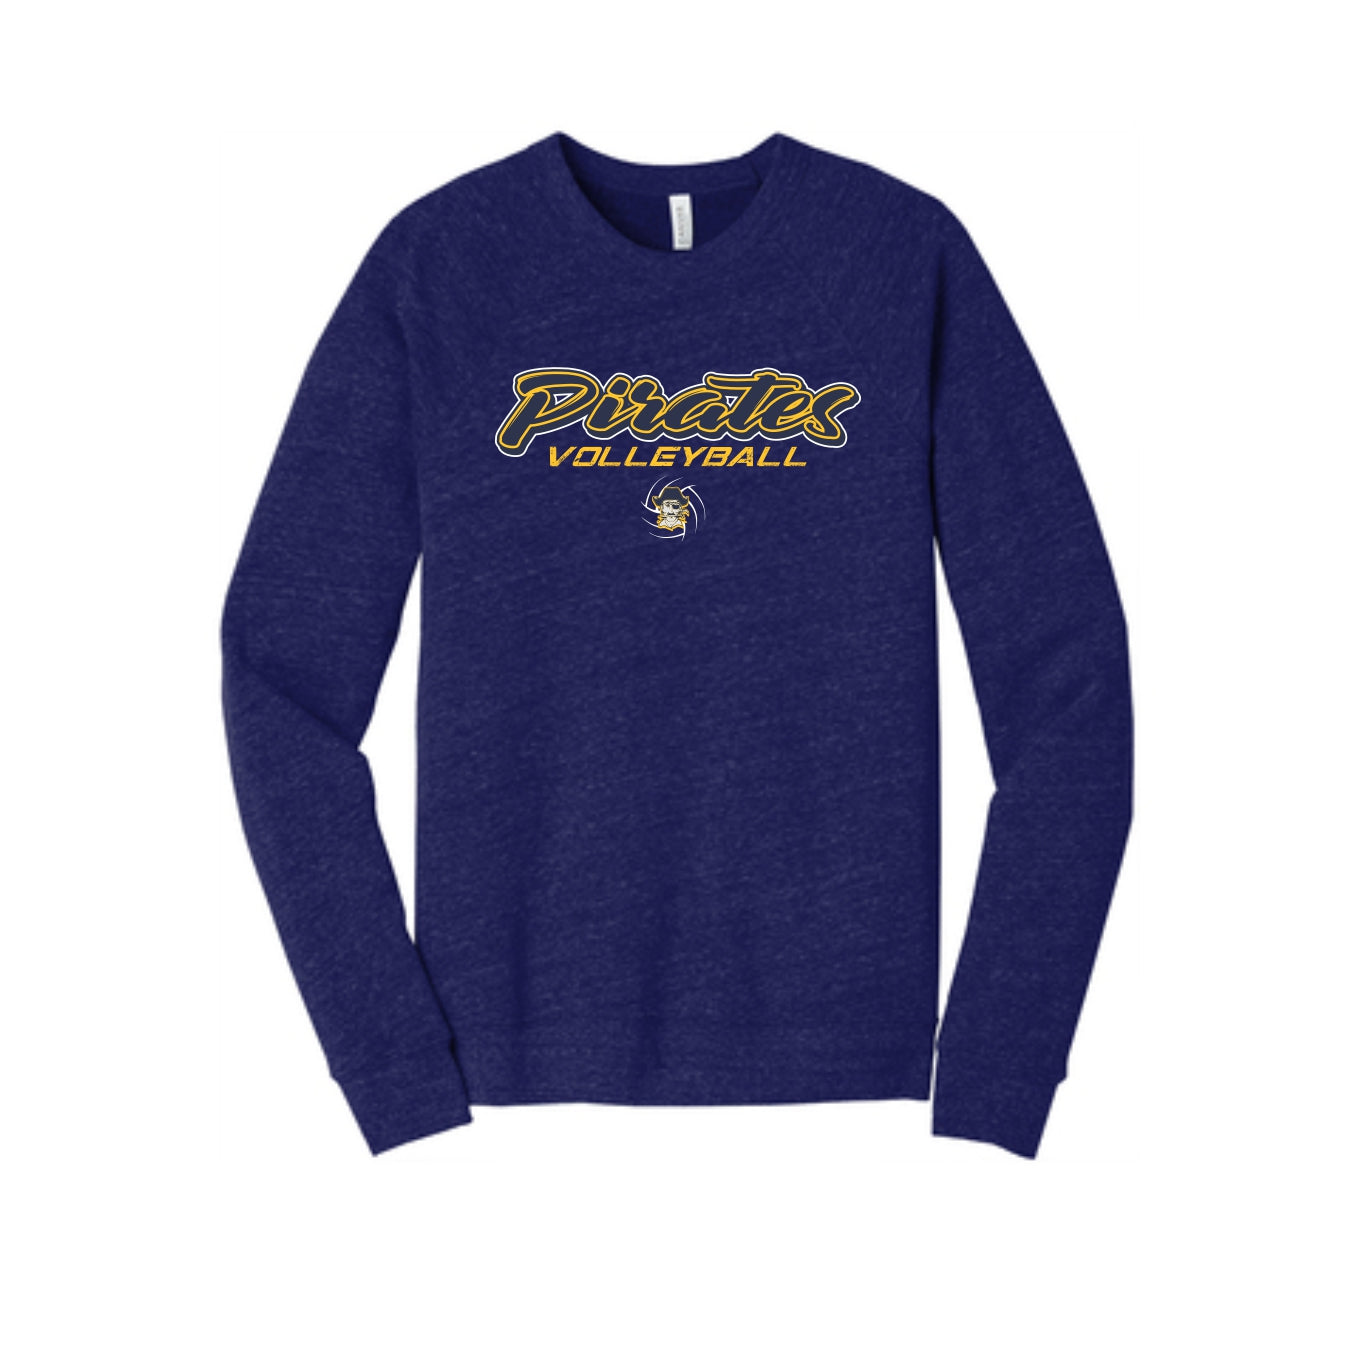 Pirate Volleyball - Fleece Bella Crew - Adult/Youth